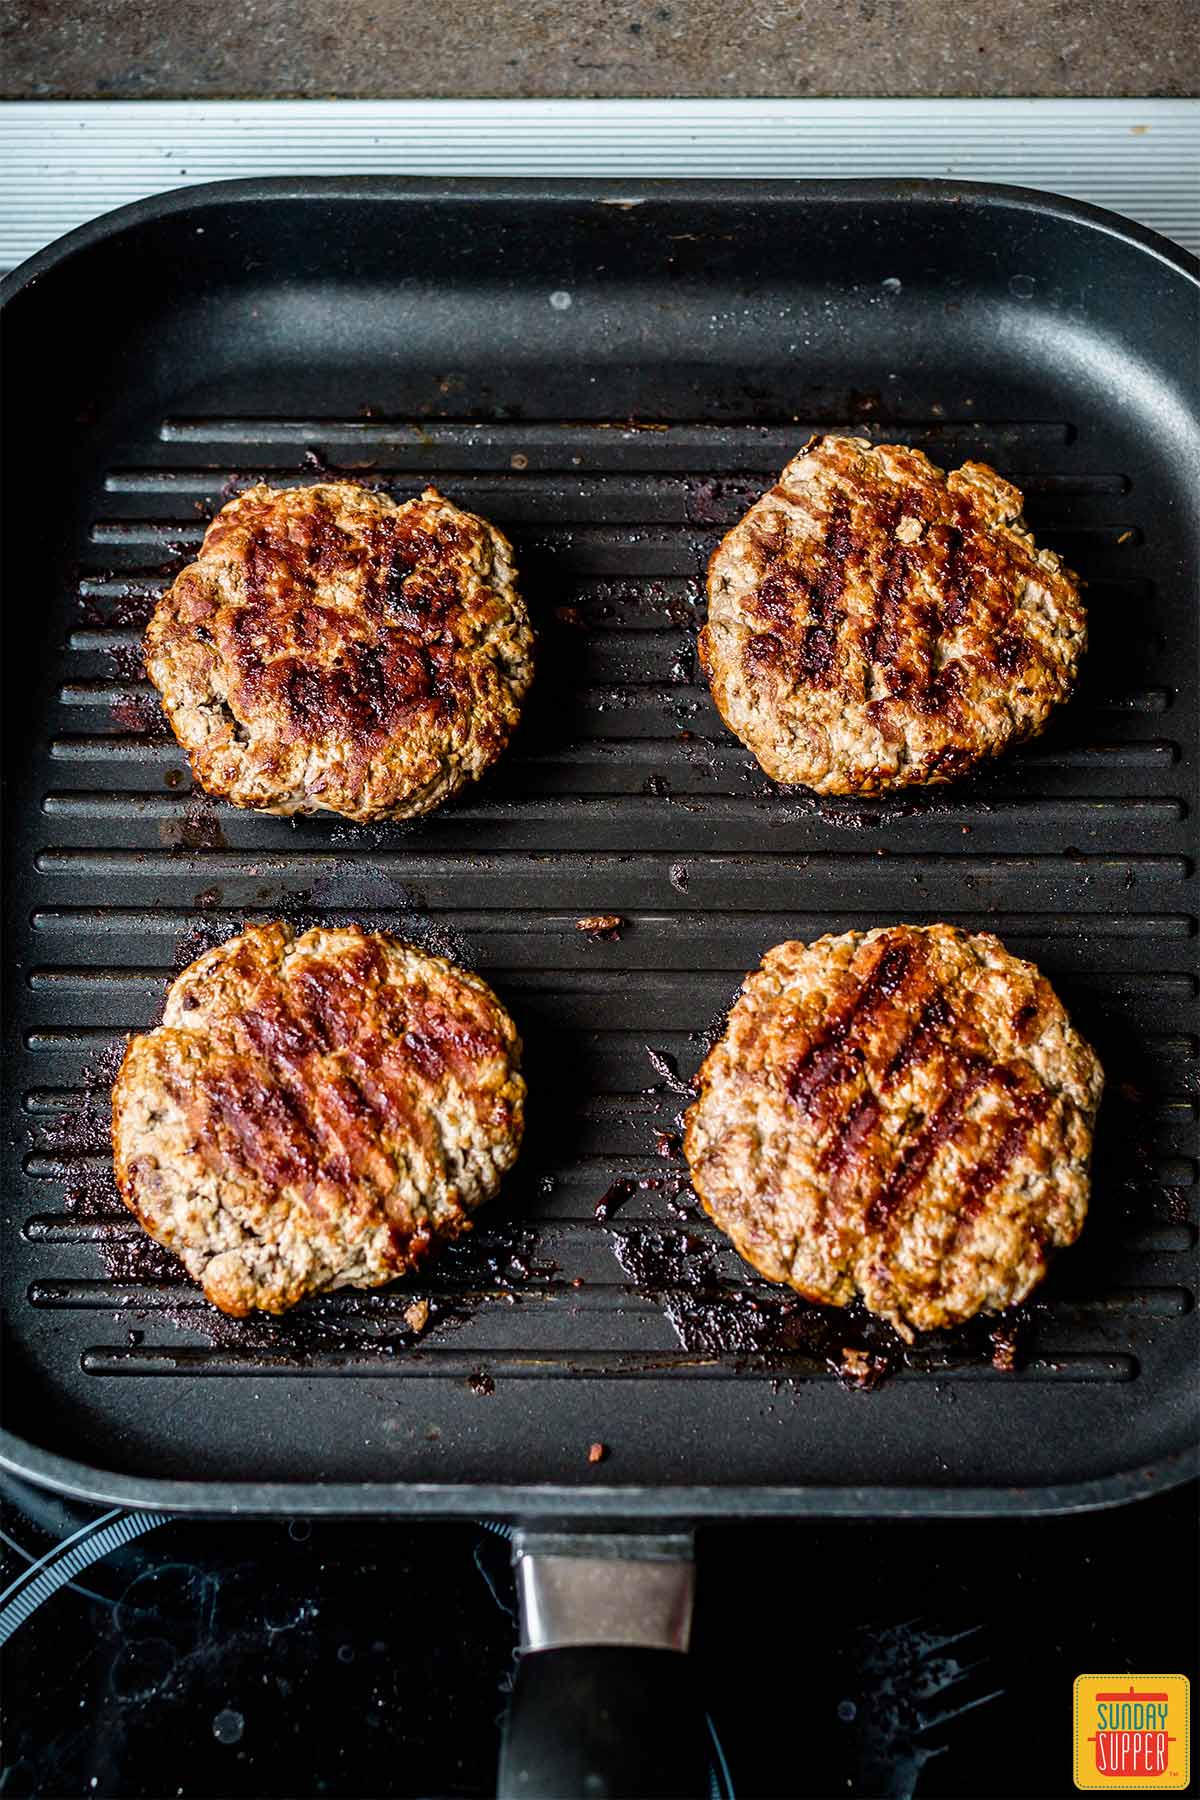 Cooked patties on the grill